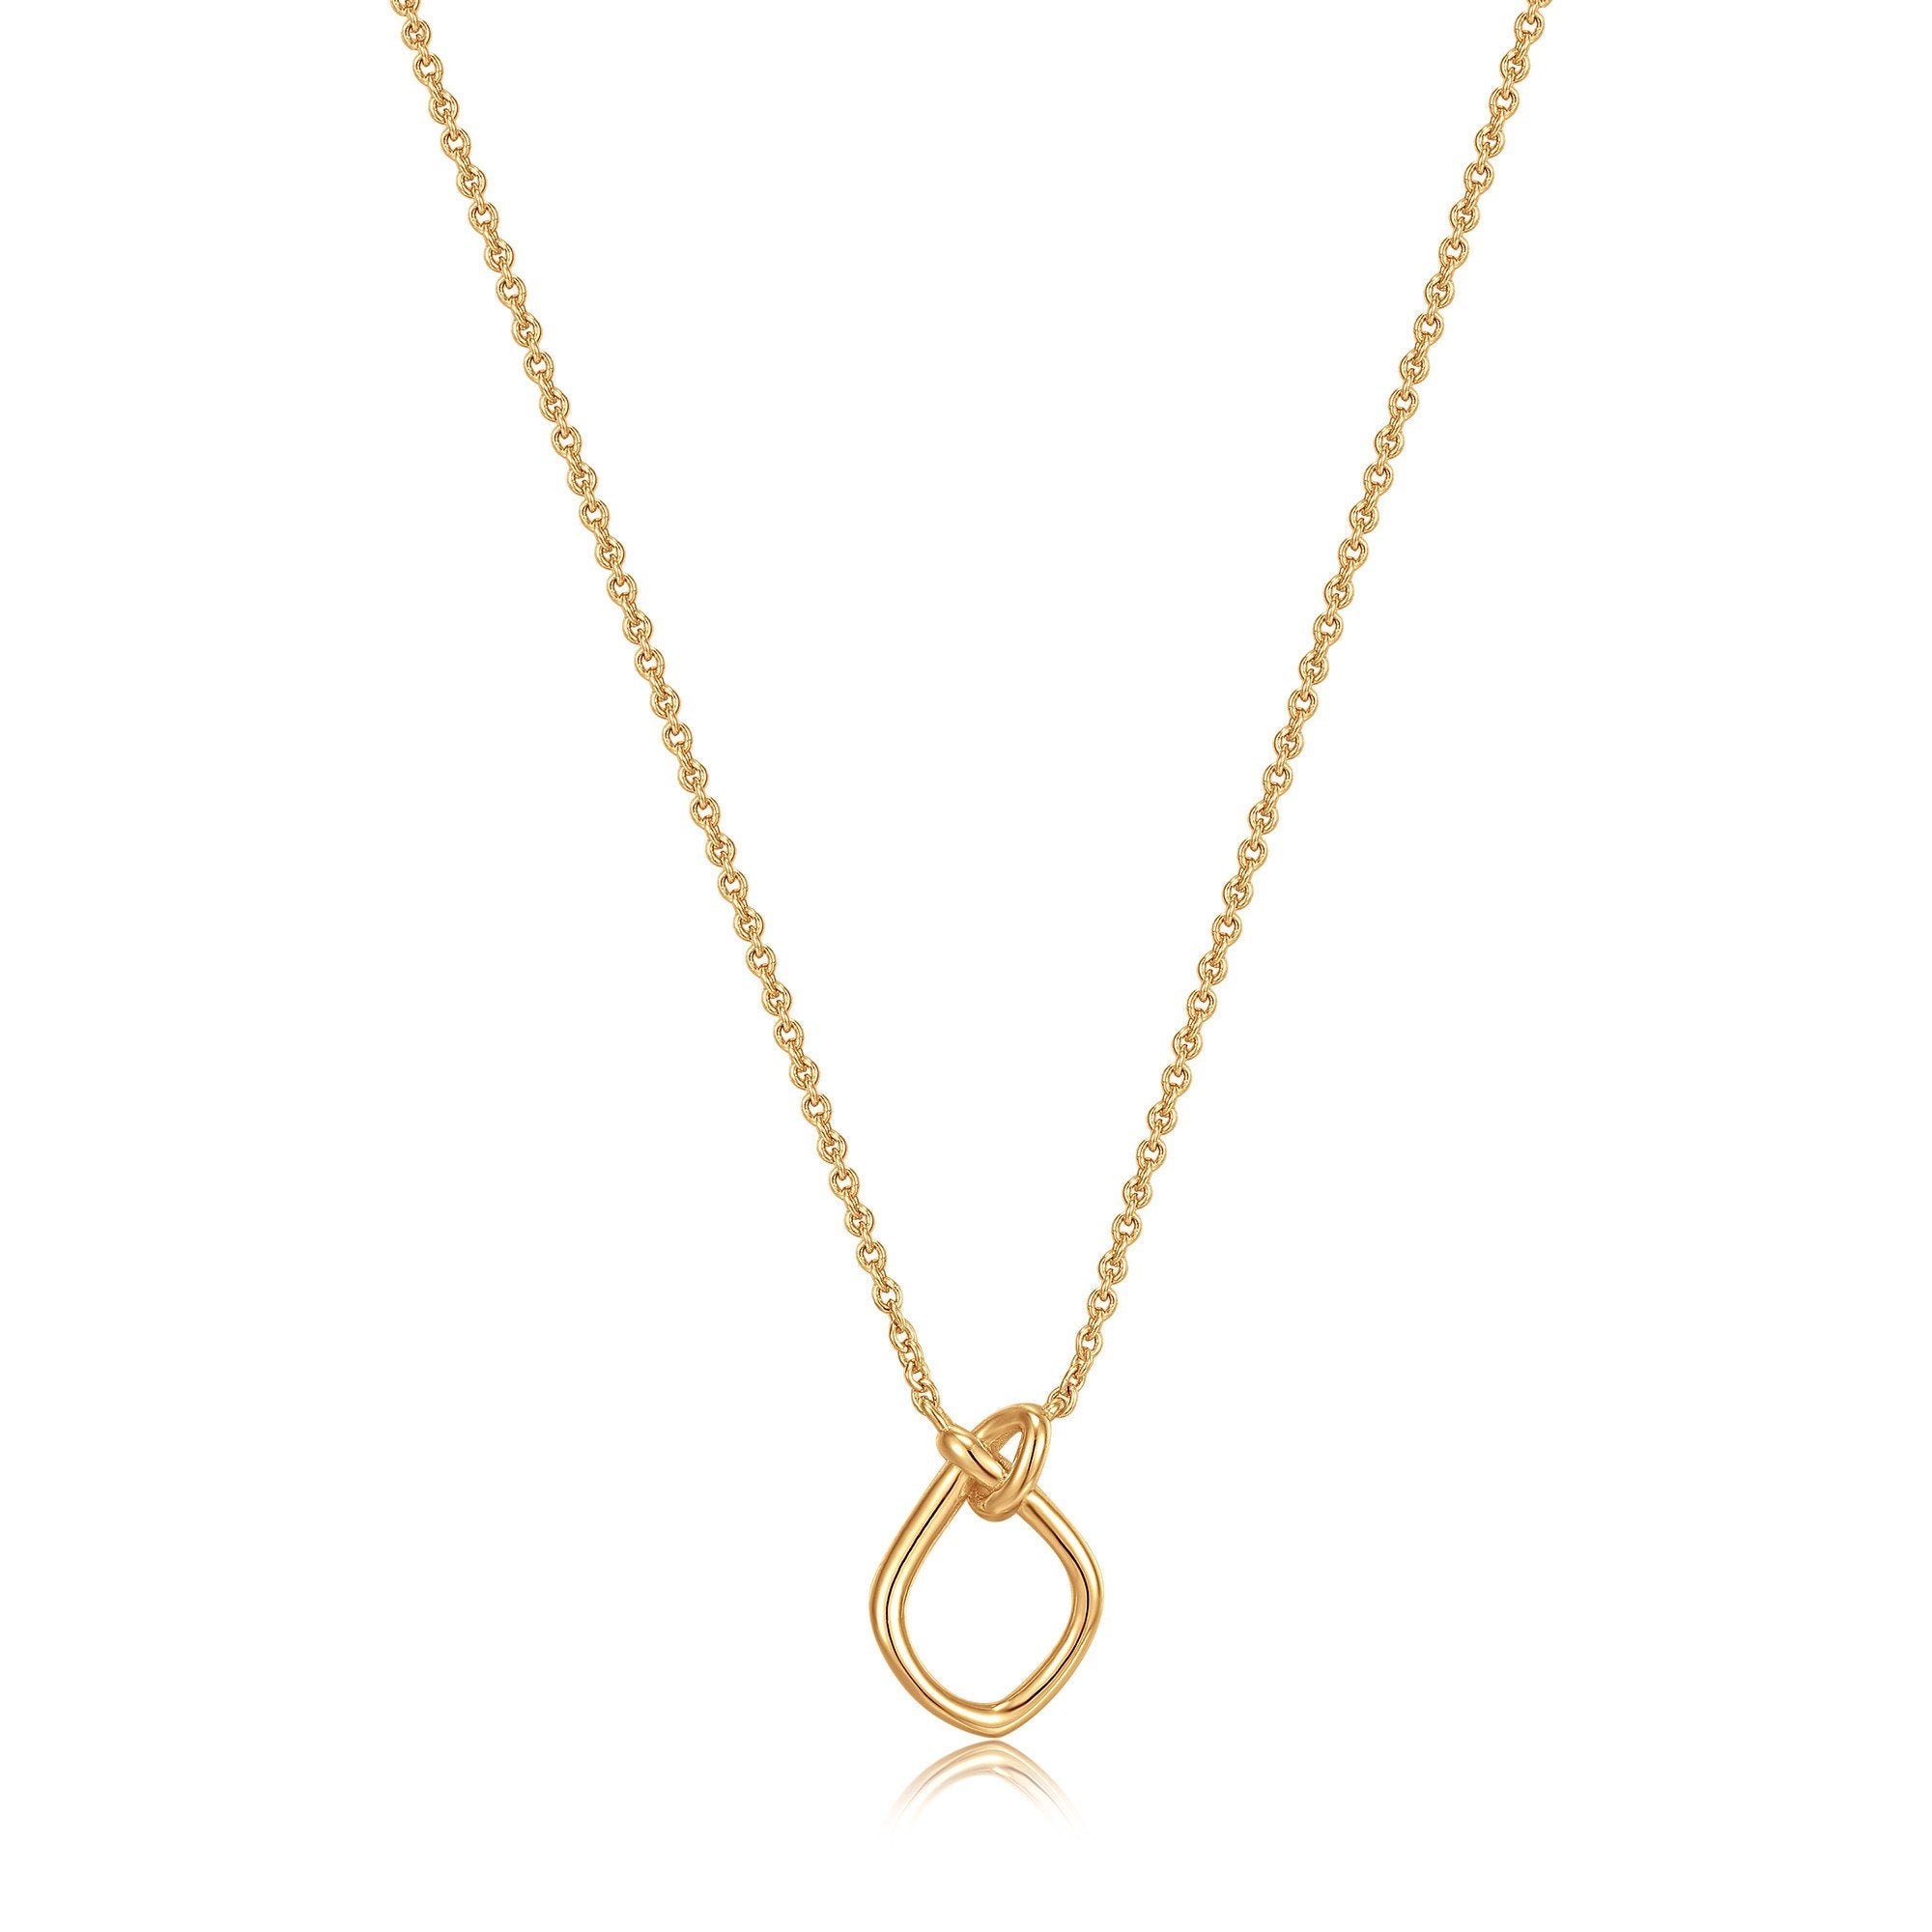 Ania Haie Gold Knot Pendant Necklace